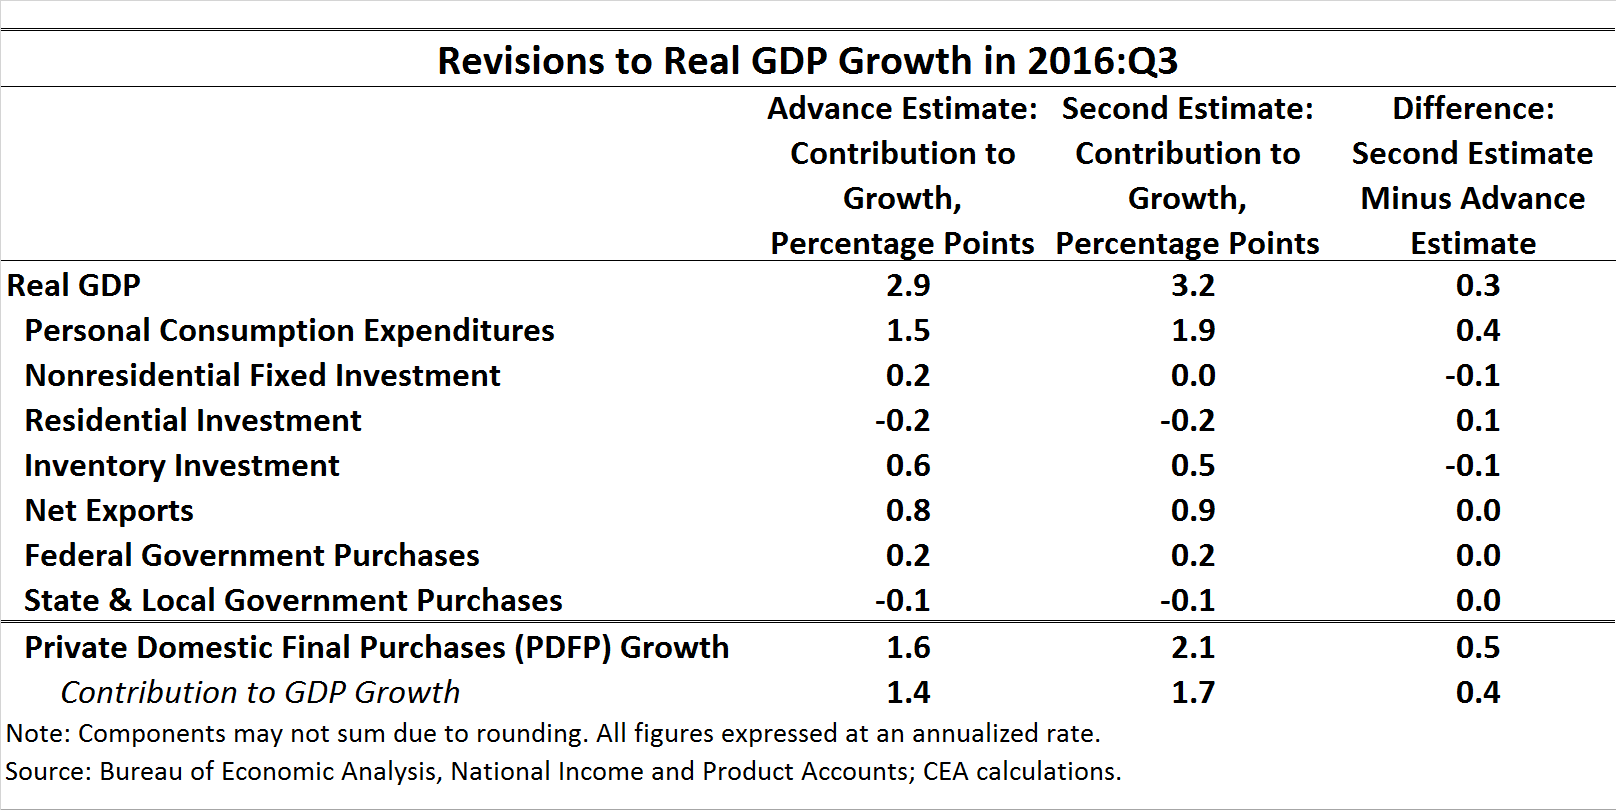 Revisions to Real GDP Growth in 2016:Q3